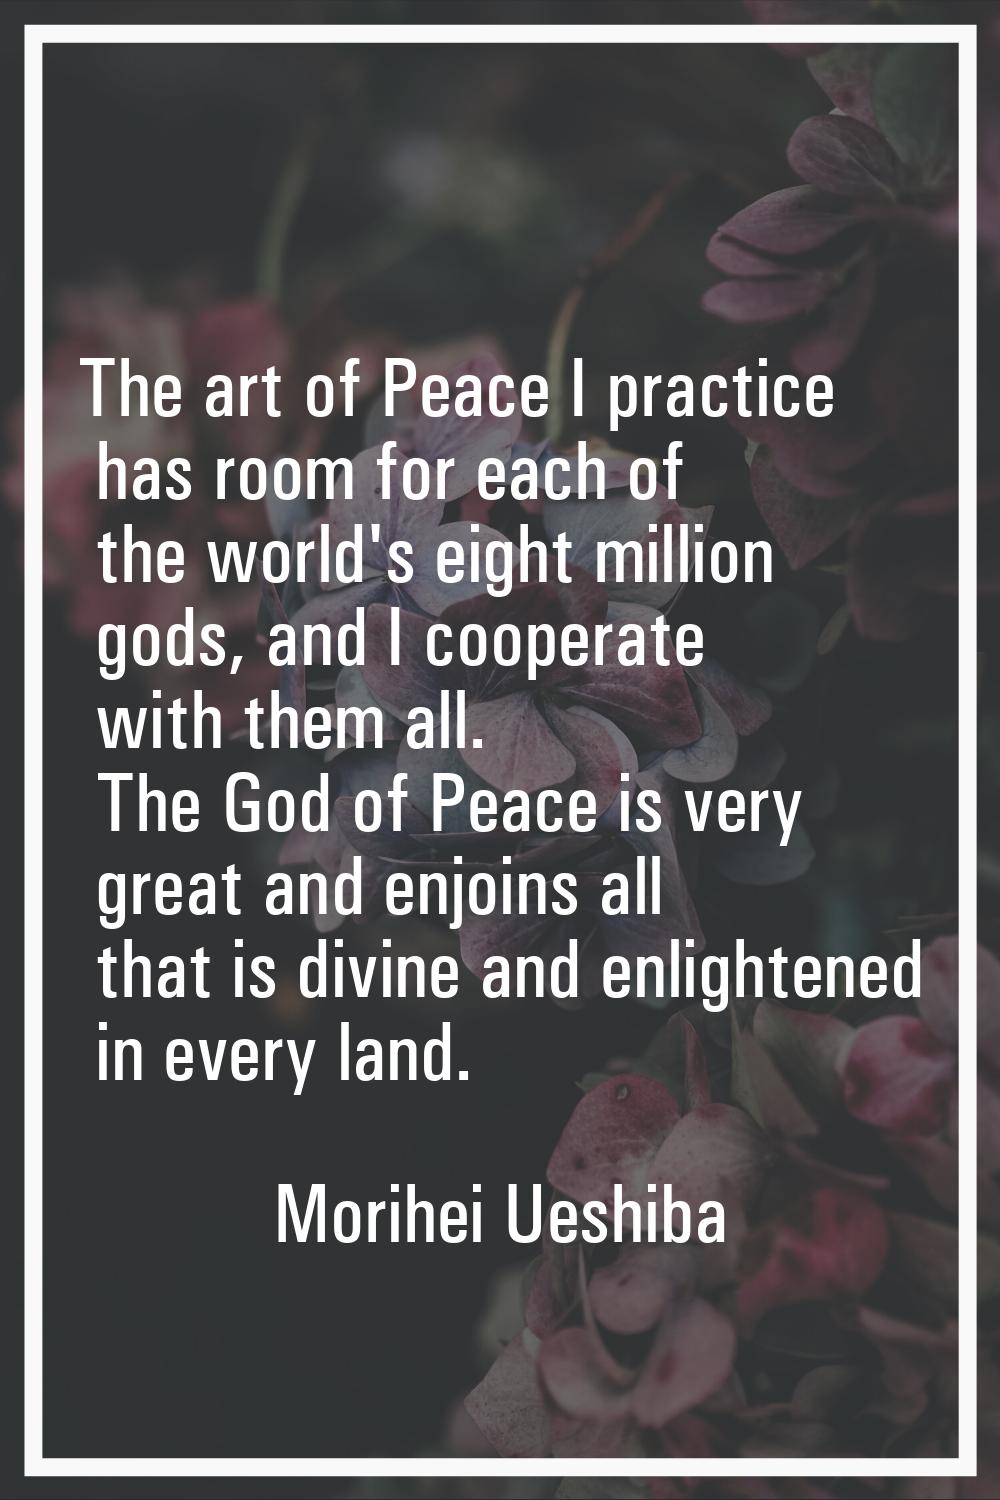 The art of Peace I practice has room for each of the world's eight million gods, and I cooperate wi